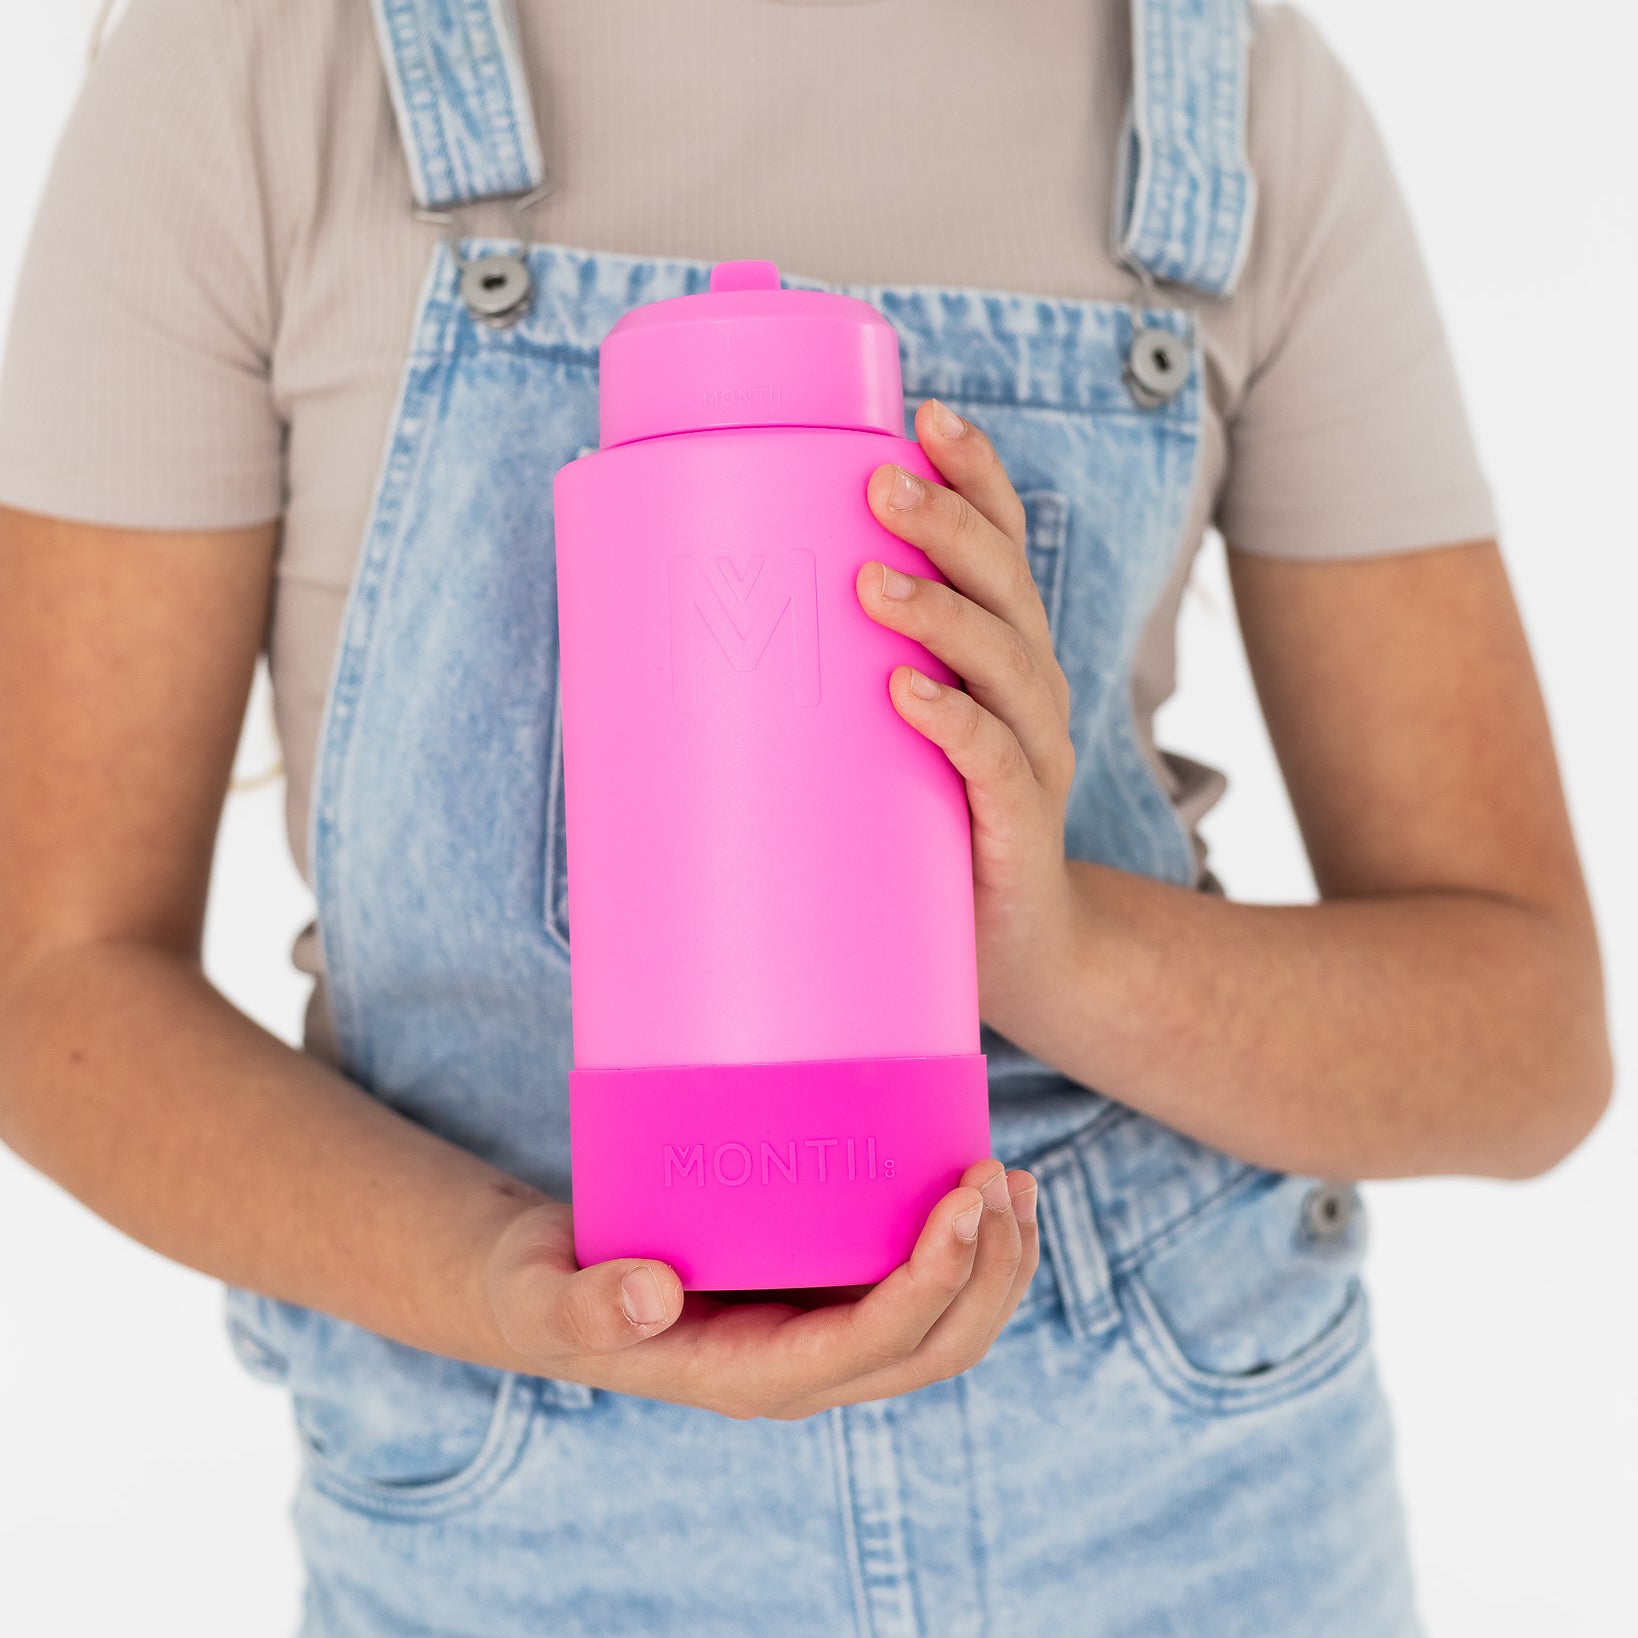 Calypso pink 1 litre insulated drink bottle base from MontiiCo